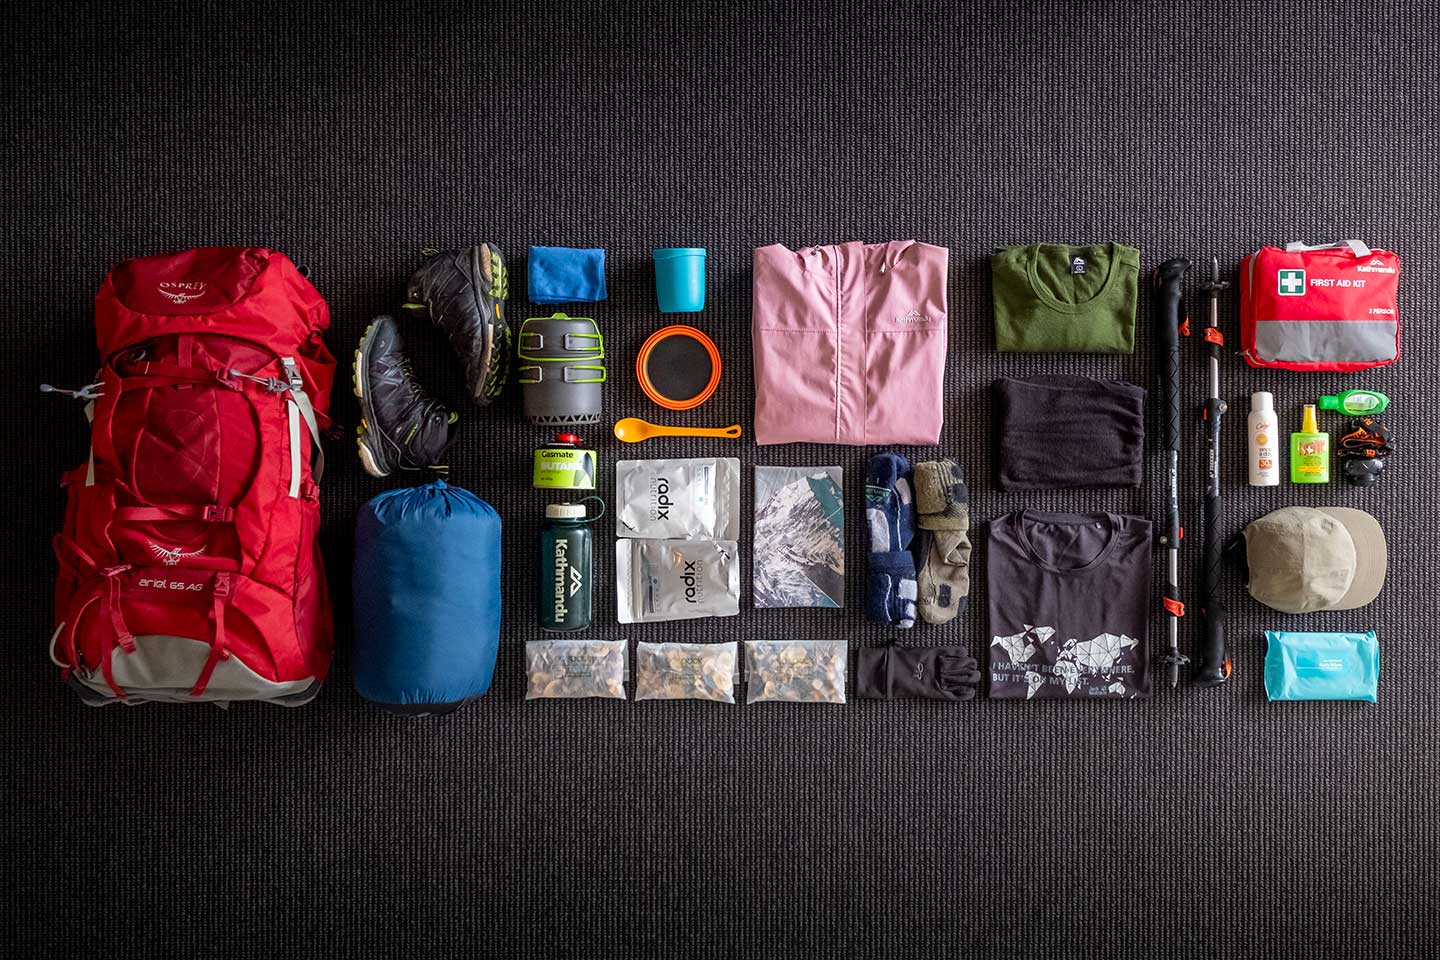 The contents of a trampers bag laid out on the floor.